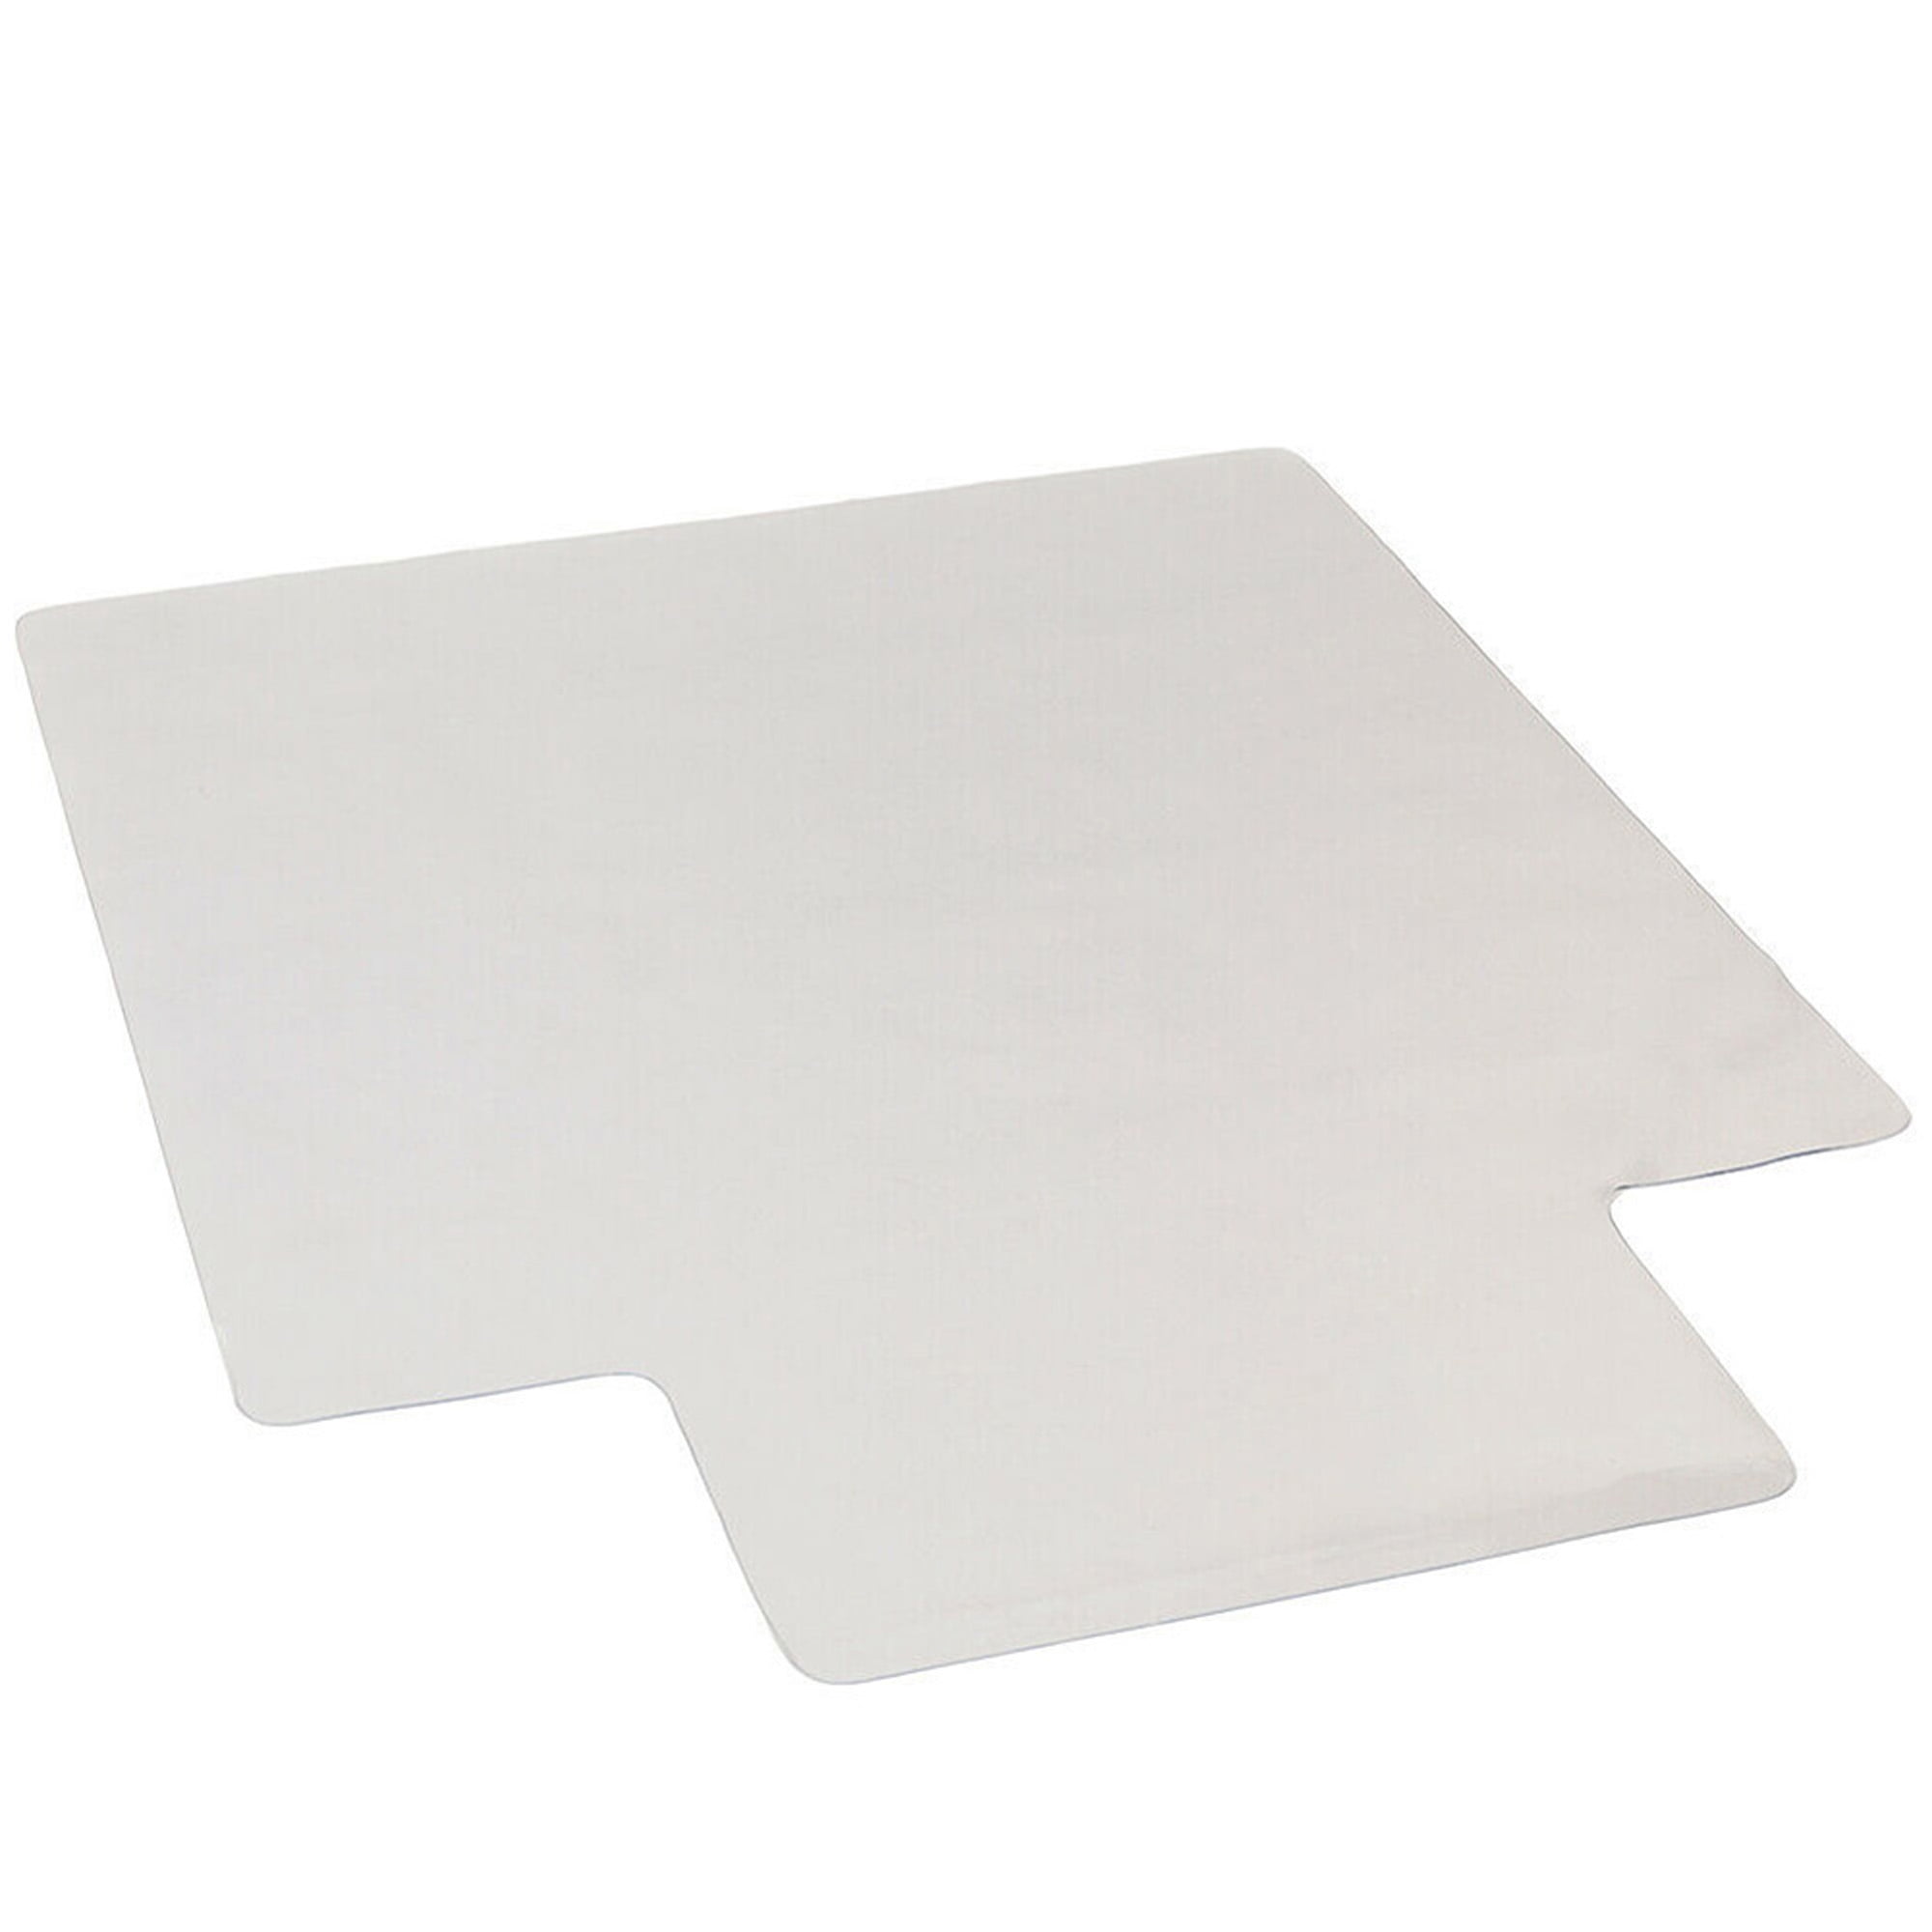 Details about   Home Office Living Room Hall Bedroom Chair Mat PVC Transparent Non Slip 